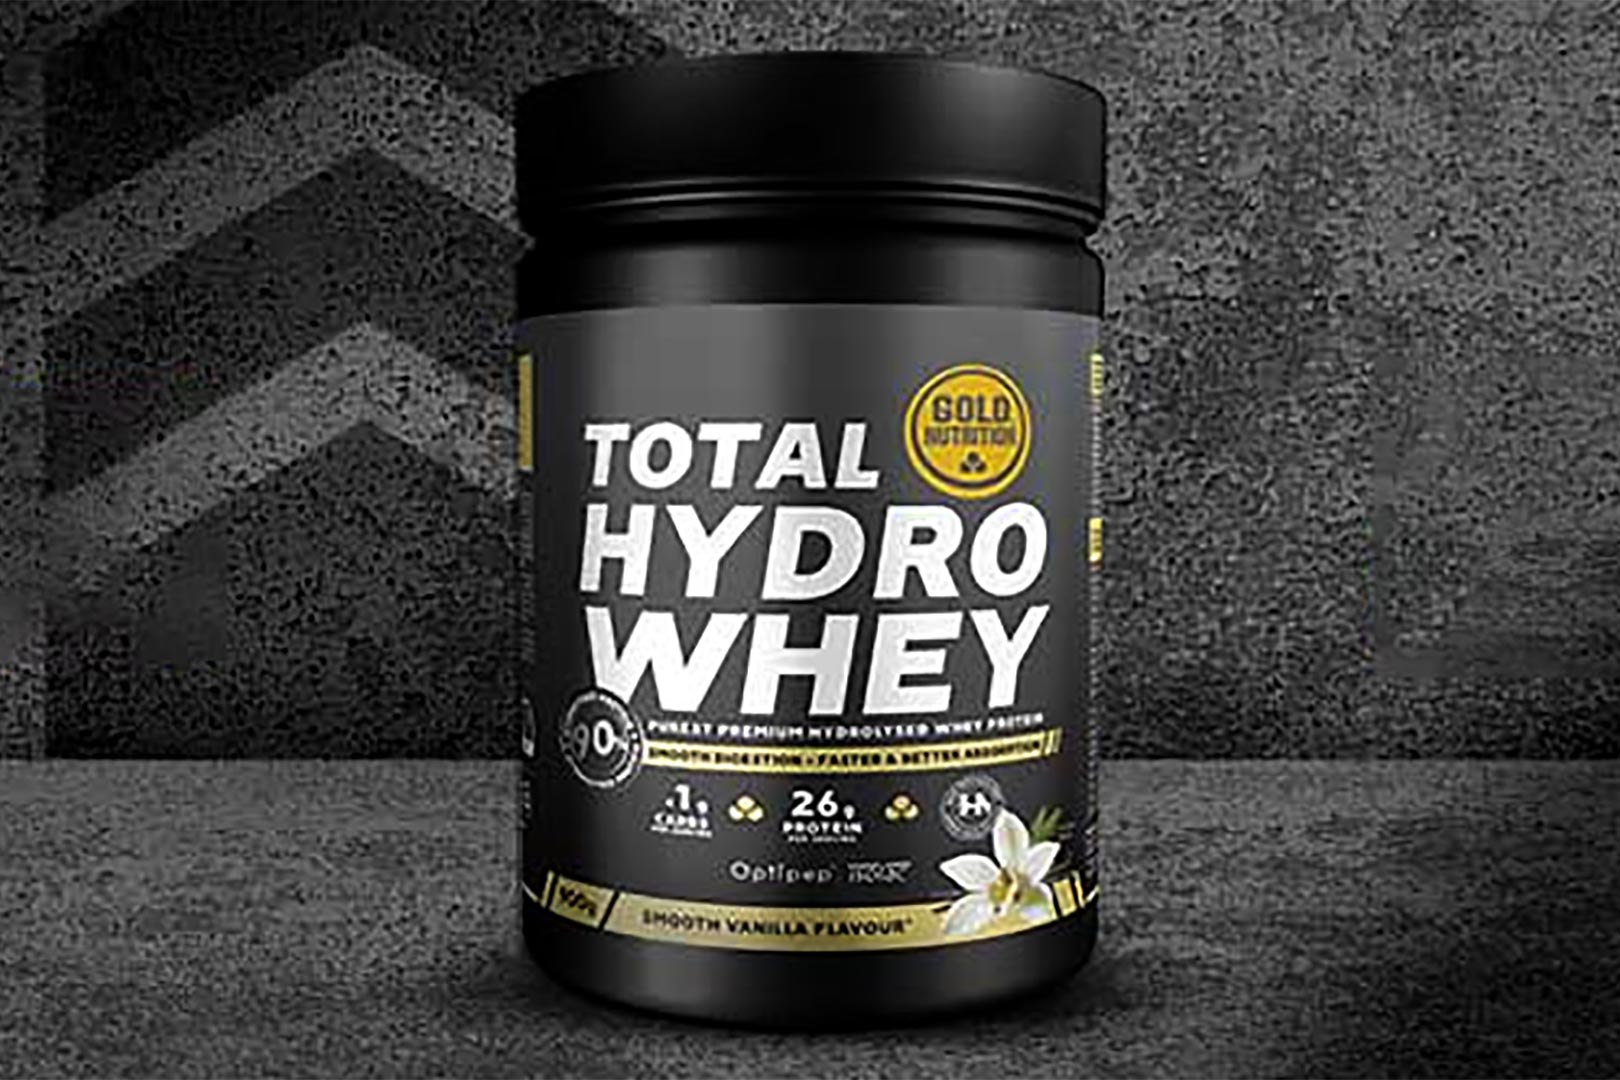 Gold Nutrition Total Hydro Whey